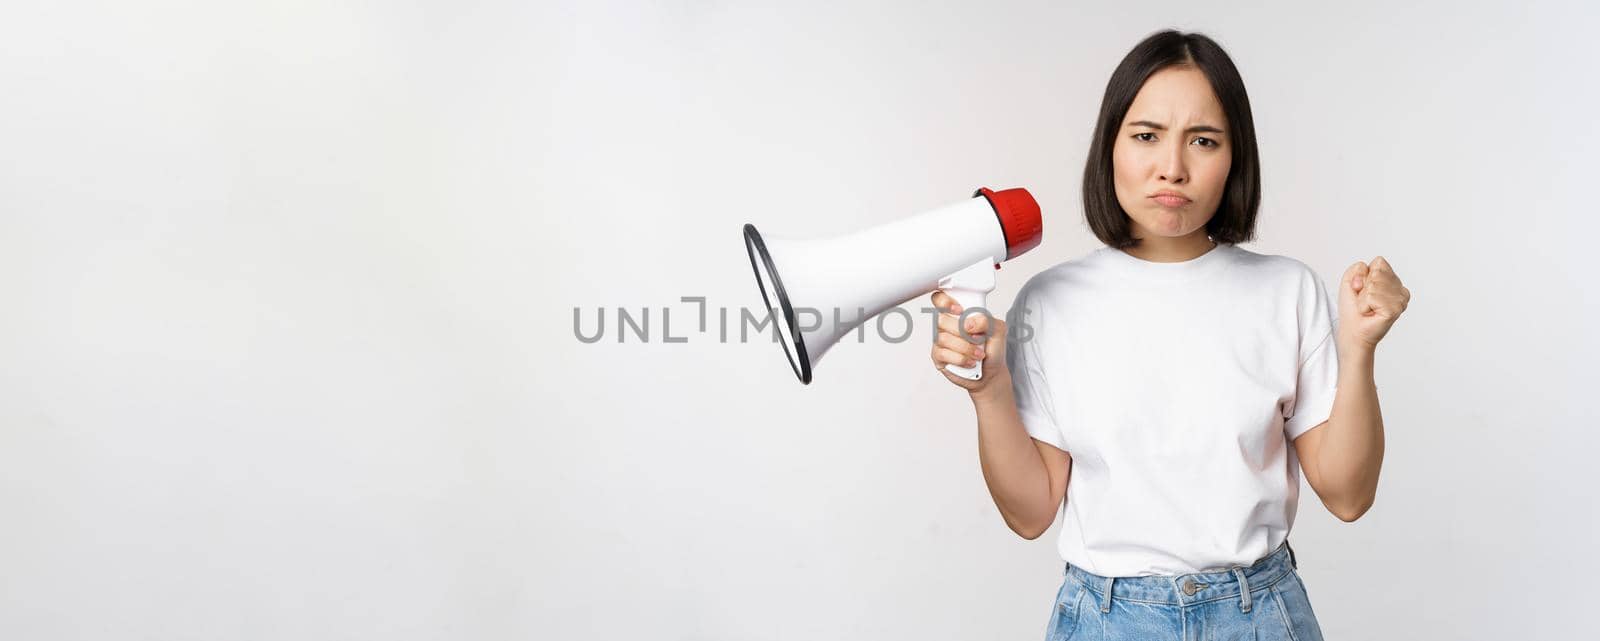 Angry asian girl activist, holding megaphone and looking furious, protesting, standing over white background. Copy space